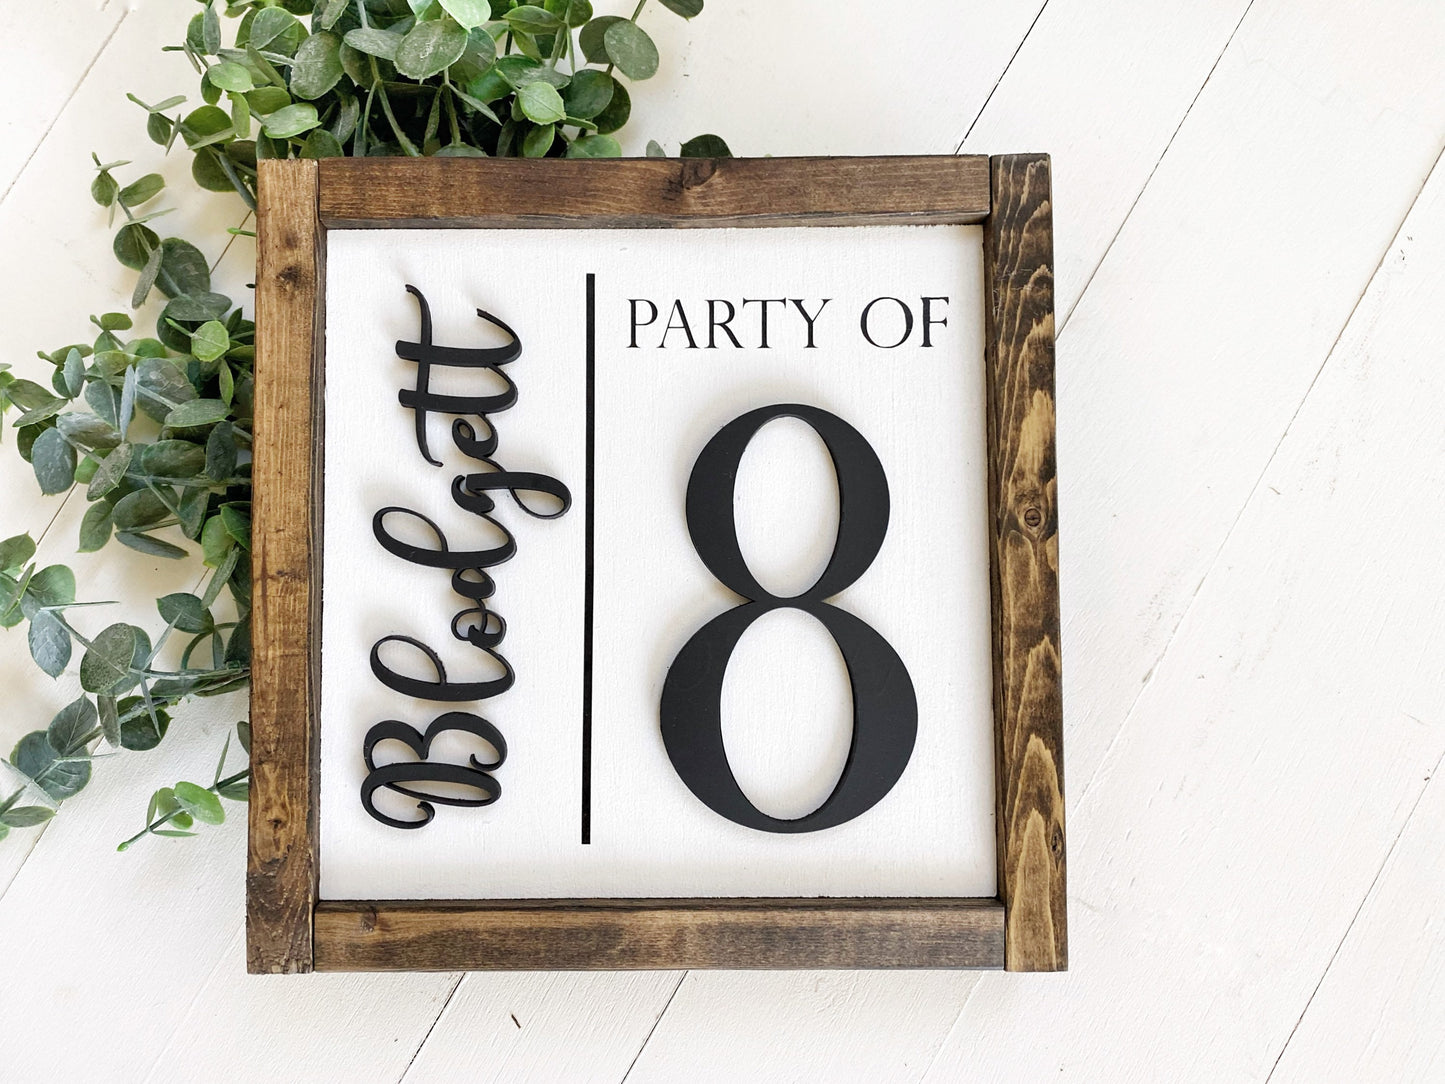 Custom Family Party of 4, 3, 5, 6 Wood Sign - Personalized Farmhouse Decor and Housewarming Gift with 3D and Engraved Lettering